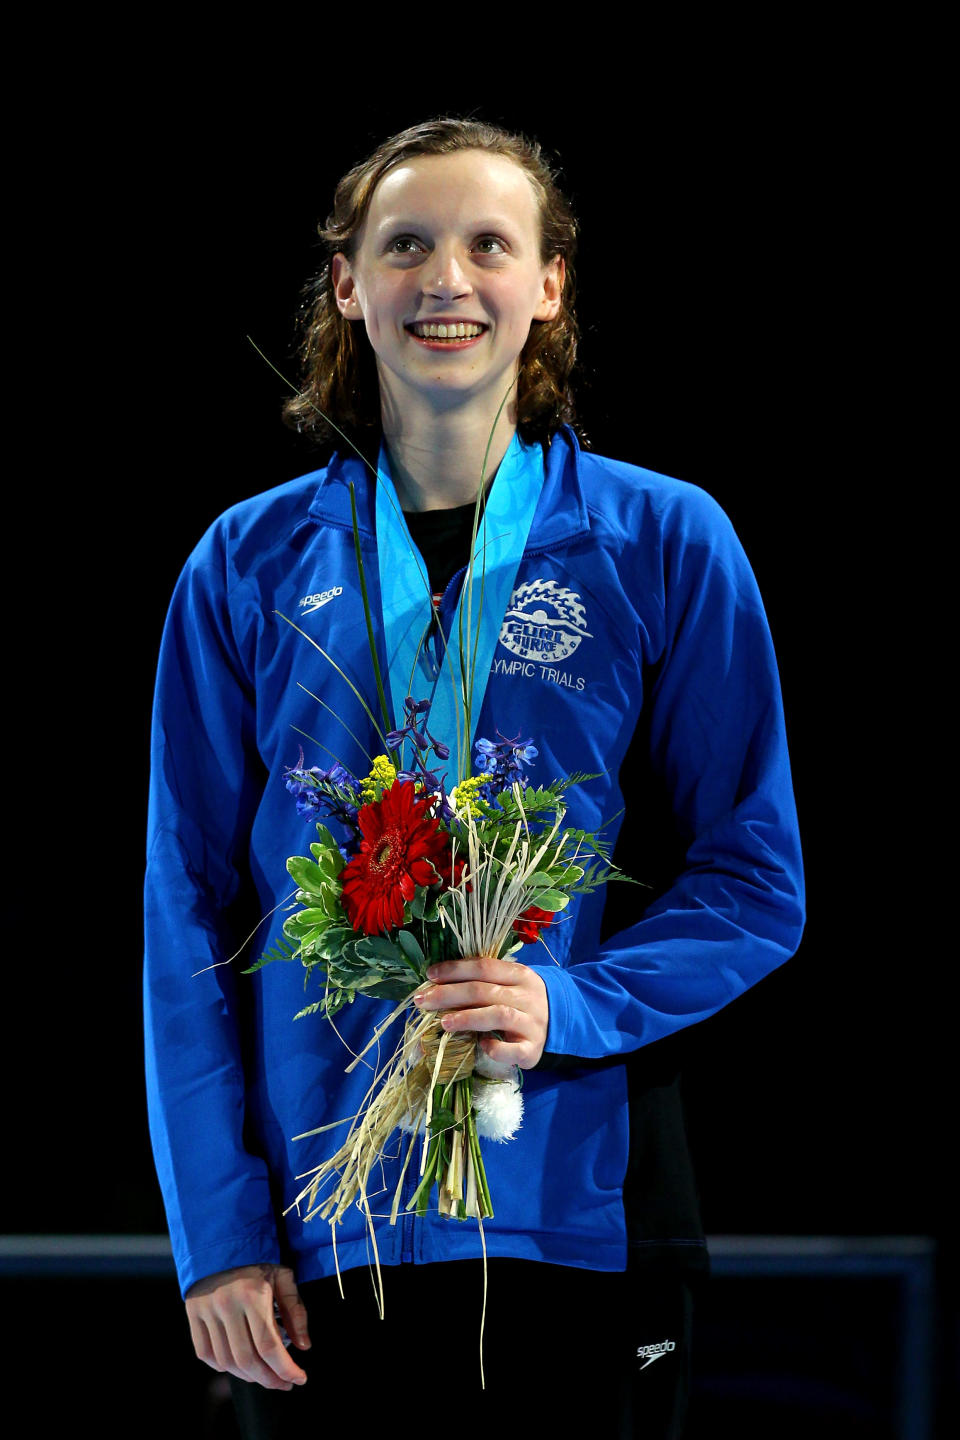 <b>Kathleen Ledecky - 15</b><br> Kathleen Ledecky participates in the medal ceremony for the Women's 800 m Freestyle during Day Seven of the 2012 U.S. Olympic Swimming Team Trials at CenturyLink Center on July 1, 2012 in Omaha, Nebraska. (Photo by Al Bello/Getty Images)